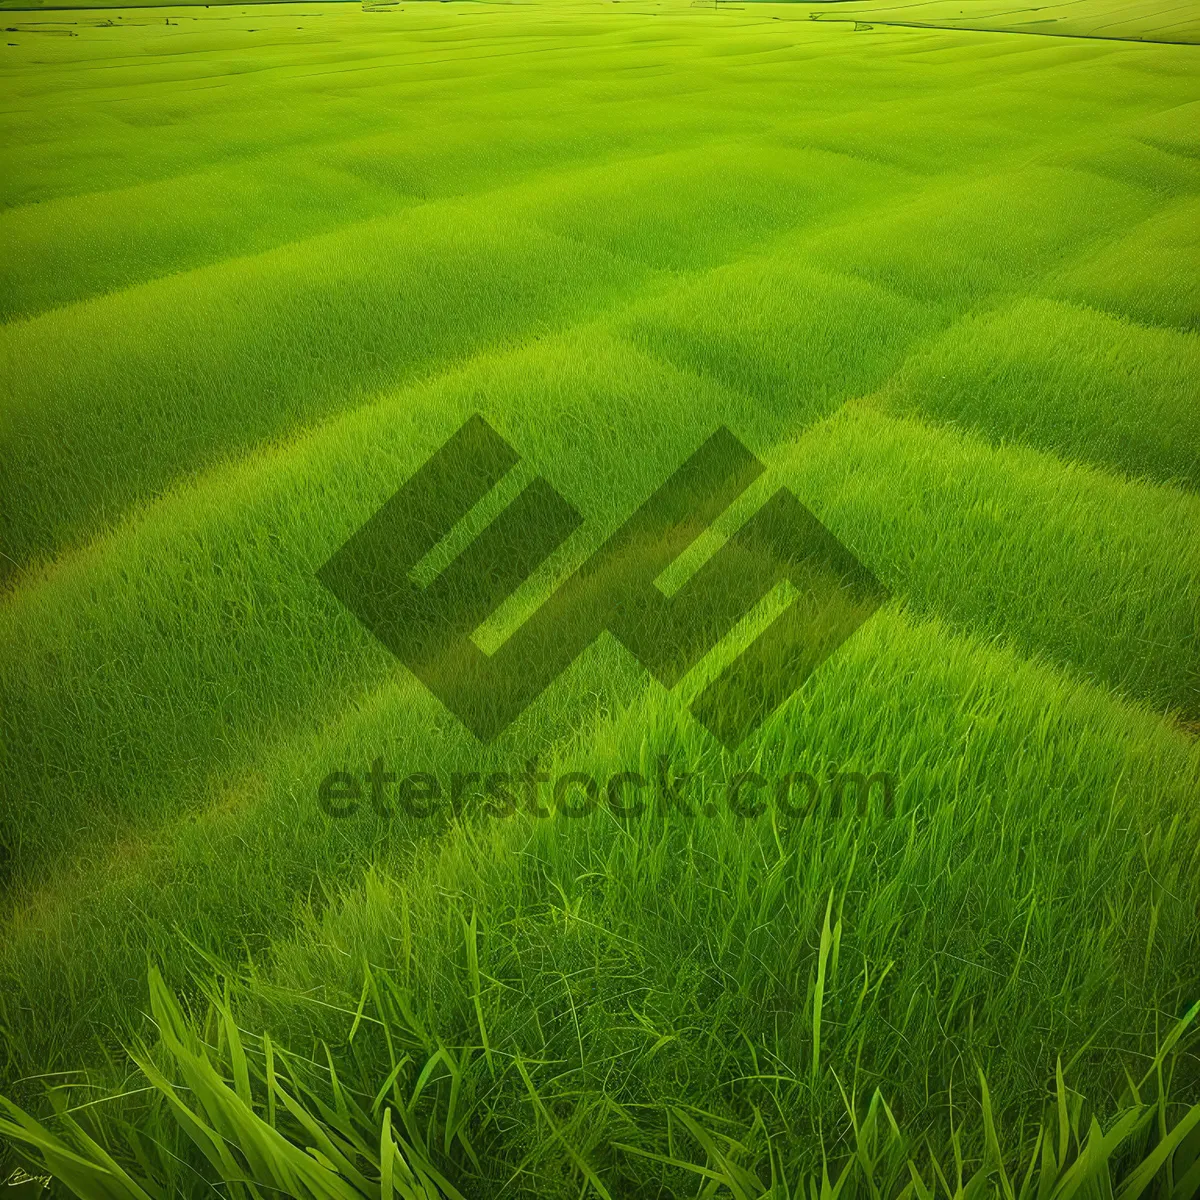 Picture of Vibrant Green Meadow Under Sunny Blue Skies.